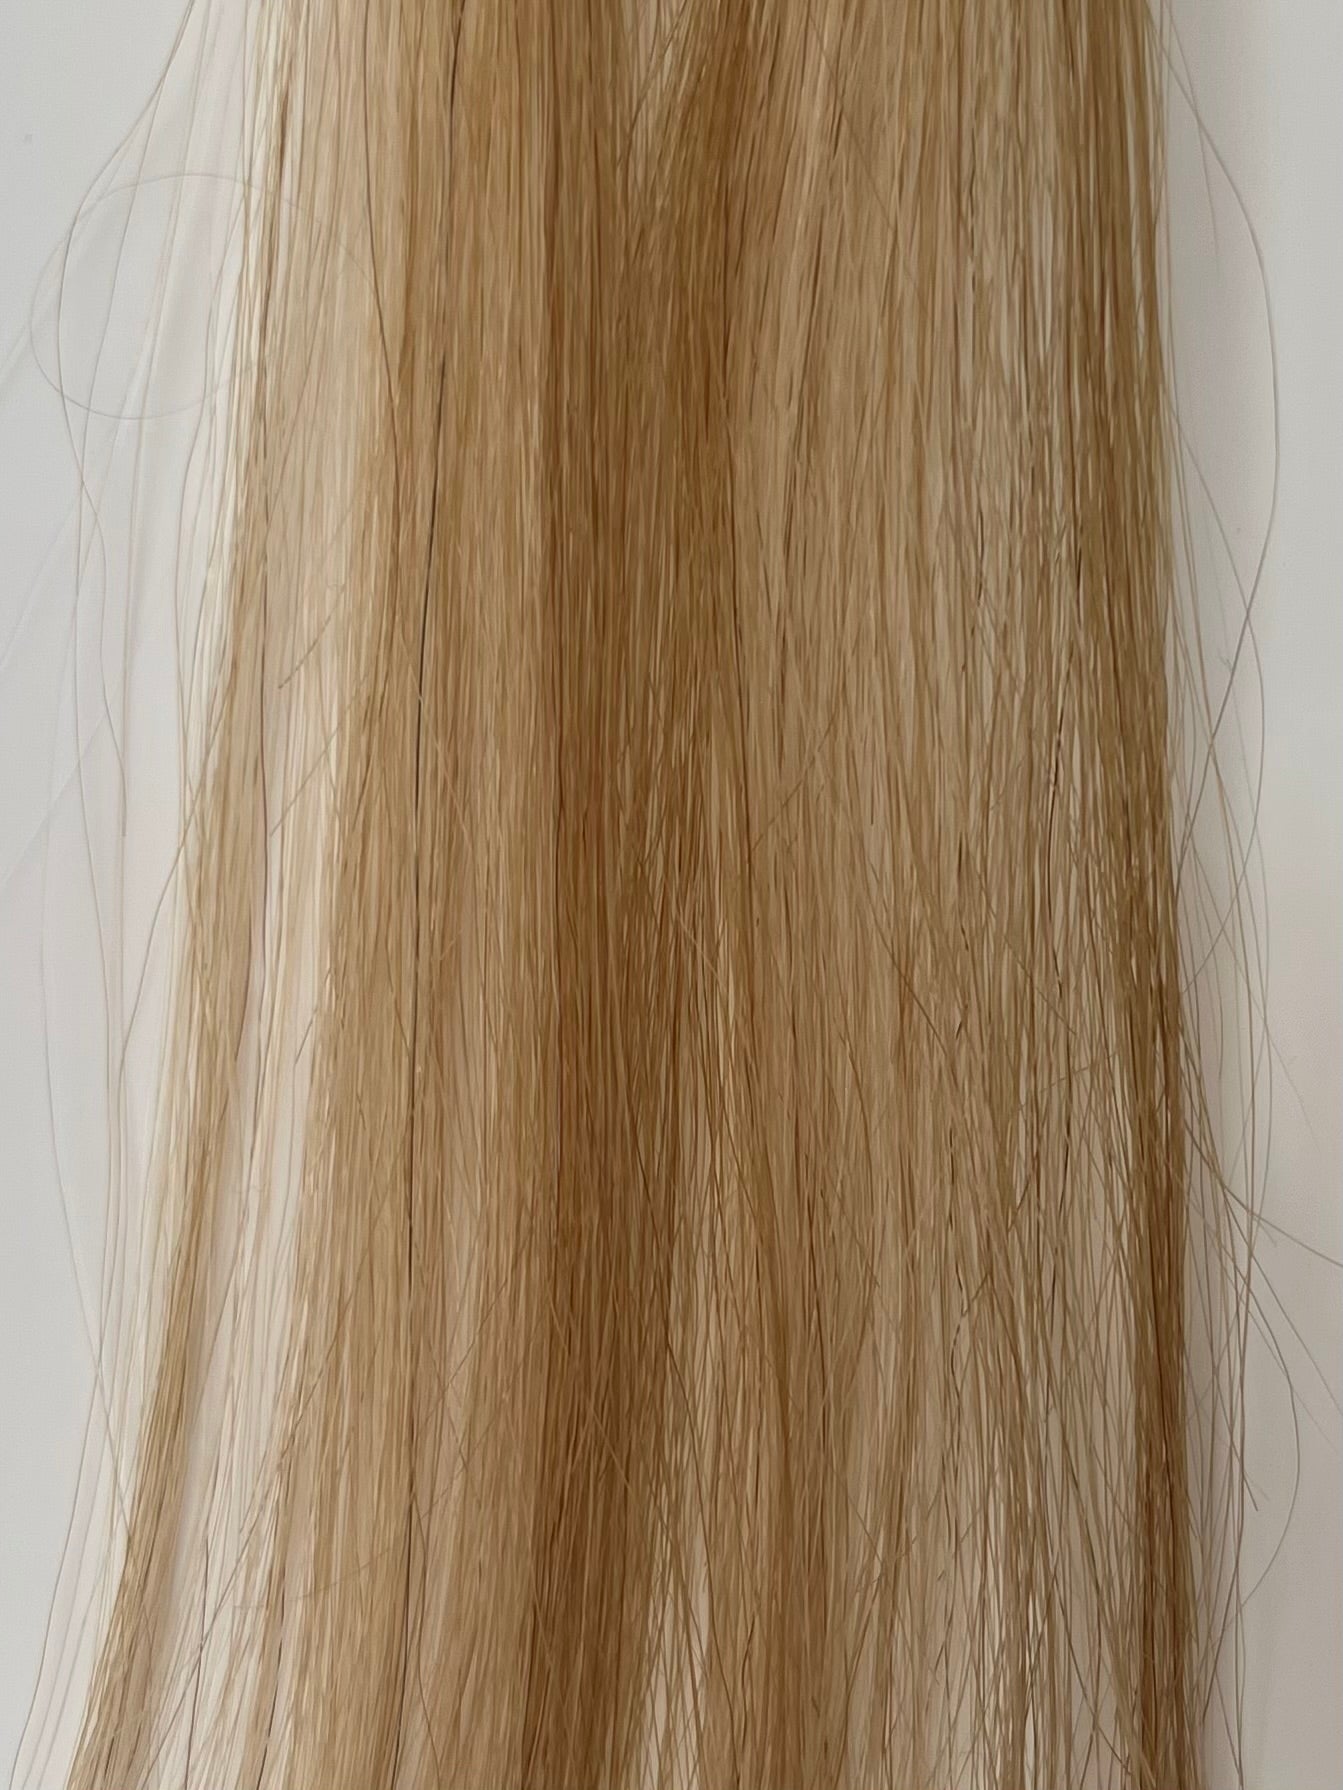 RETAIL CLIP IN EXTENSIONS - HIGHLIGHTED - PARISIAN BLONDE